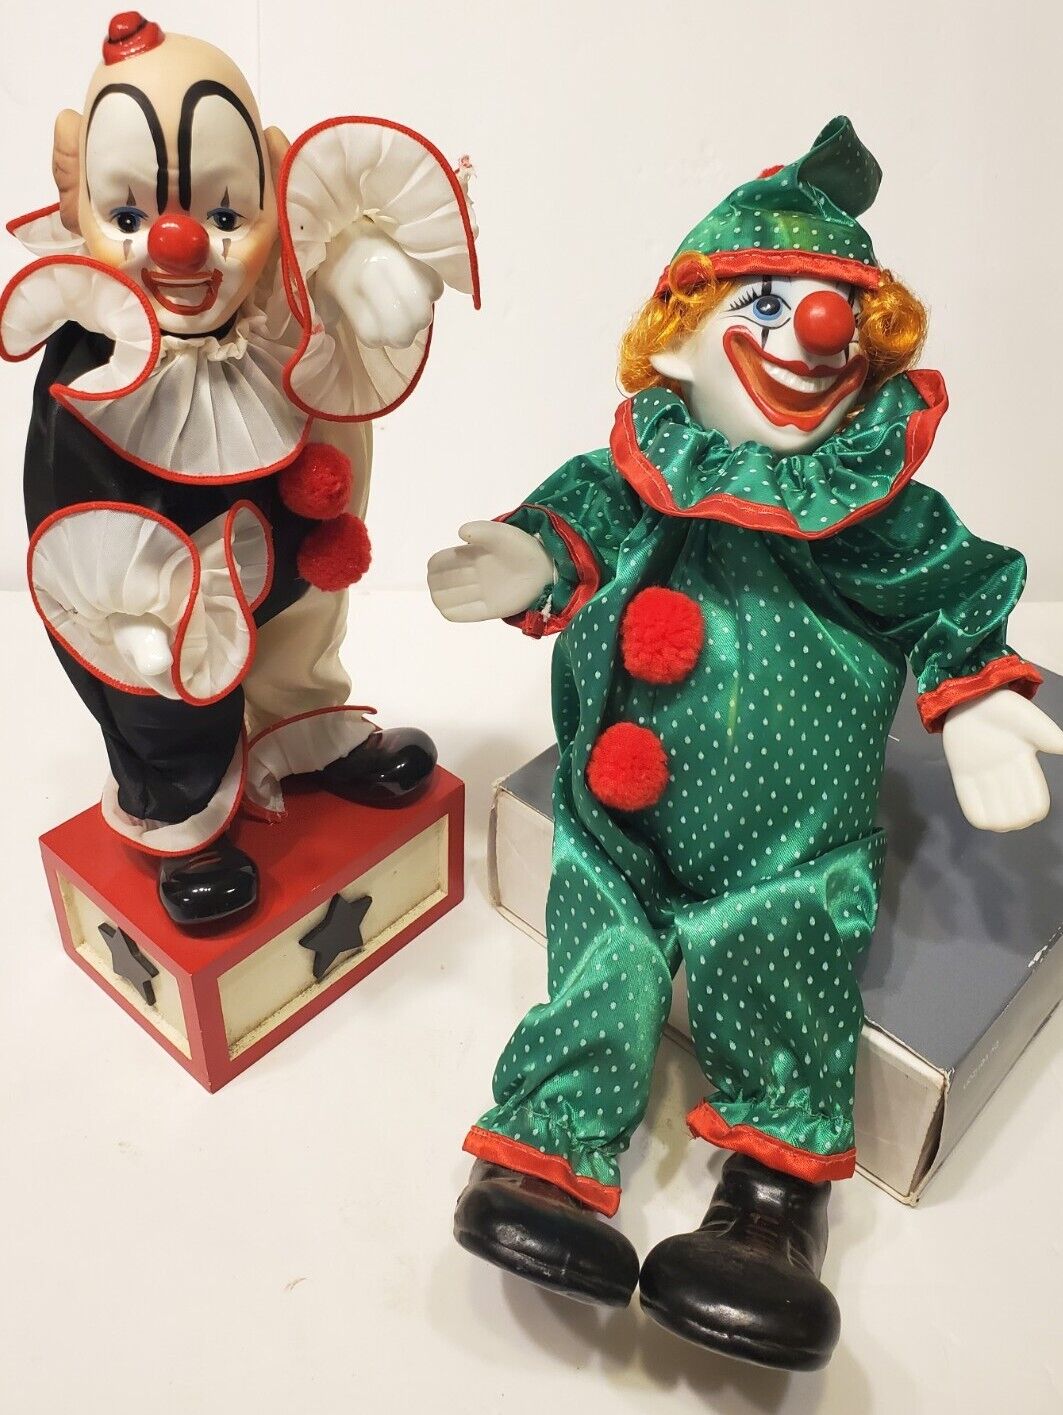 RARE VINTAGE Musical Animated Working WIND-UP Collectable CLOWNS   Porcelain 